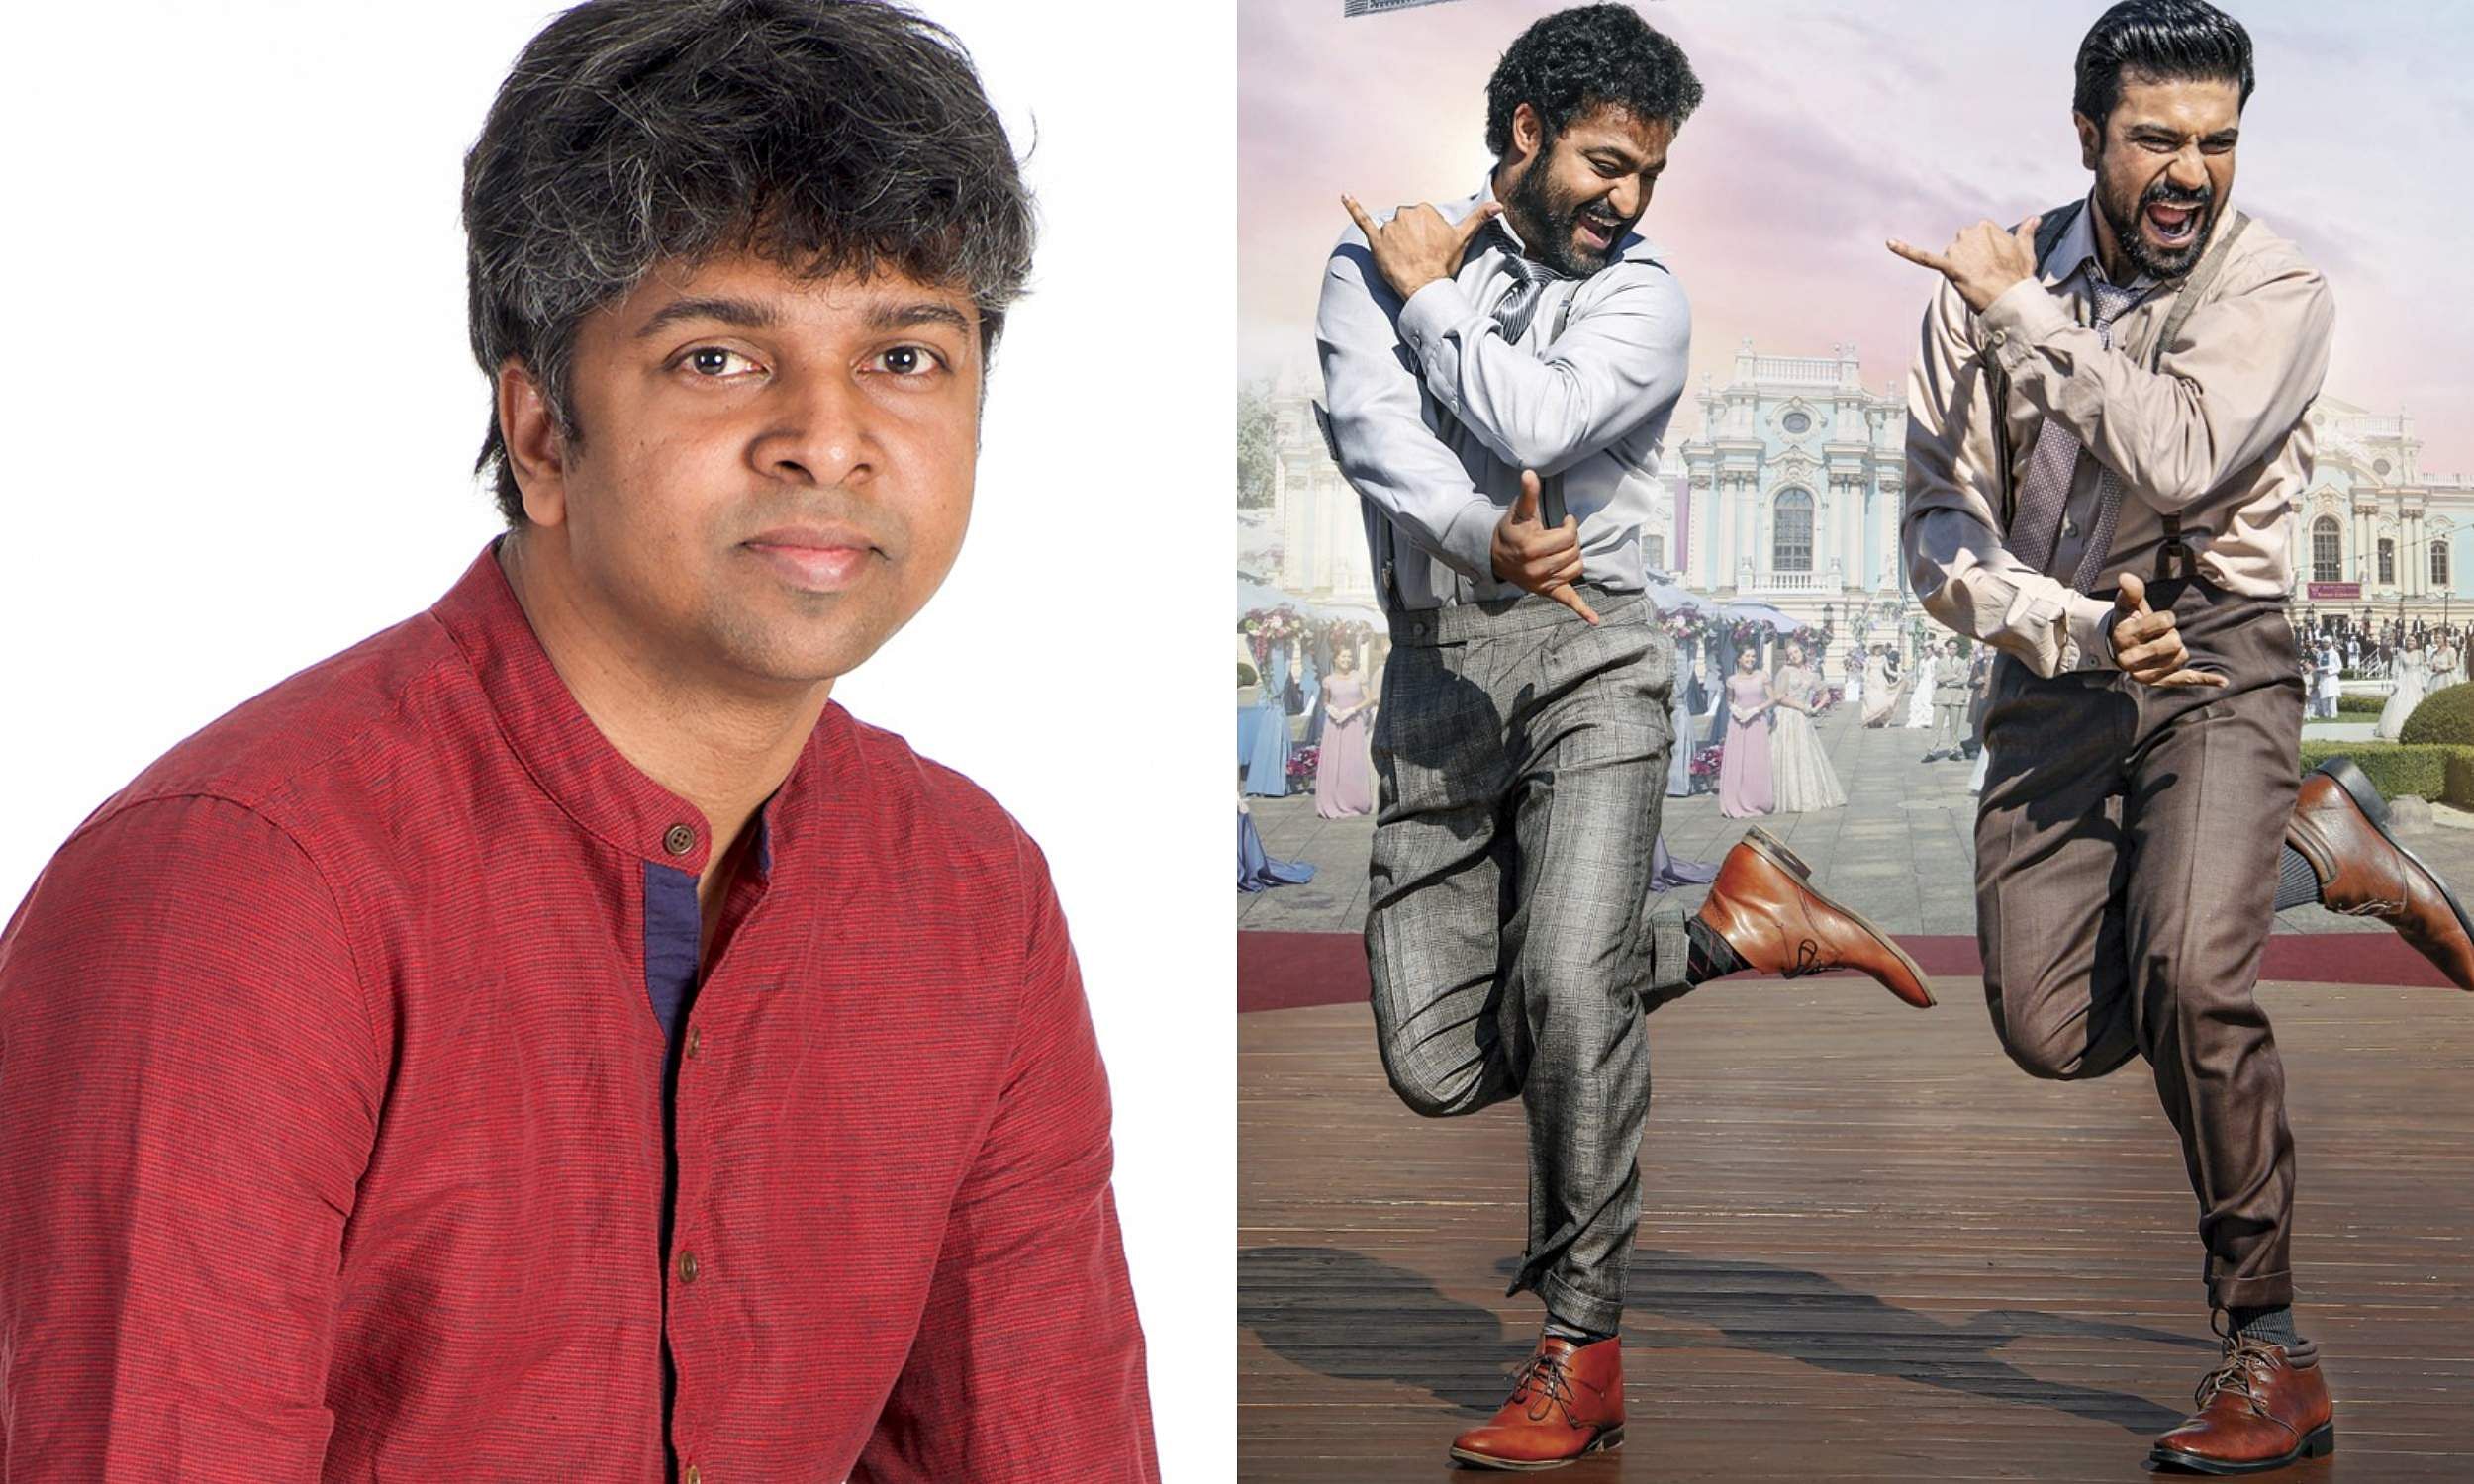 Oscars 2023: Keeravaani is generally not a fan of 'kuthu' songs, says Madhan Karky